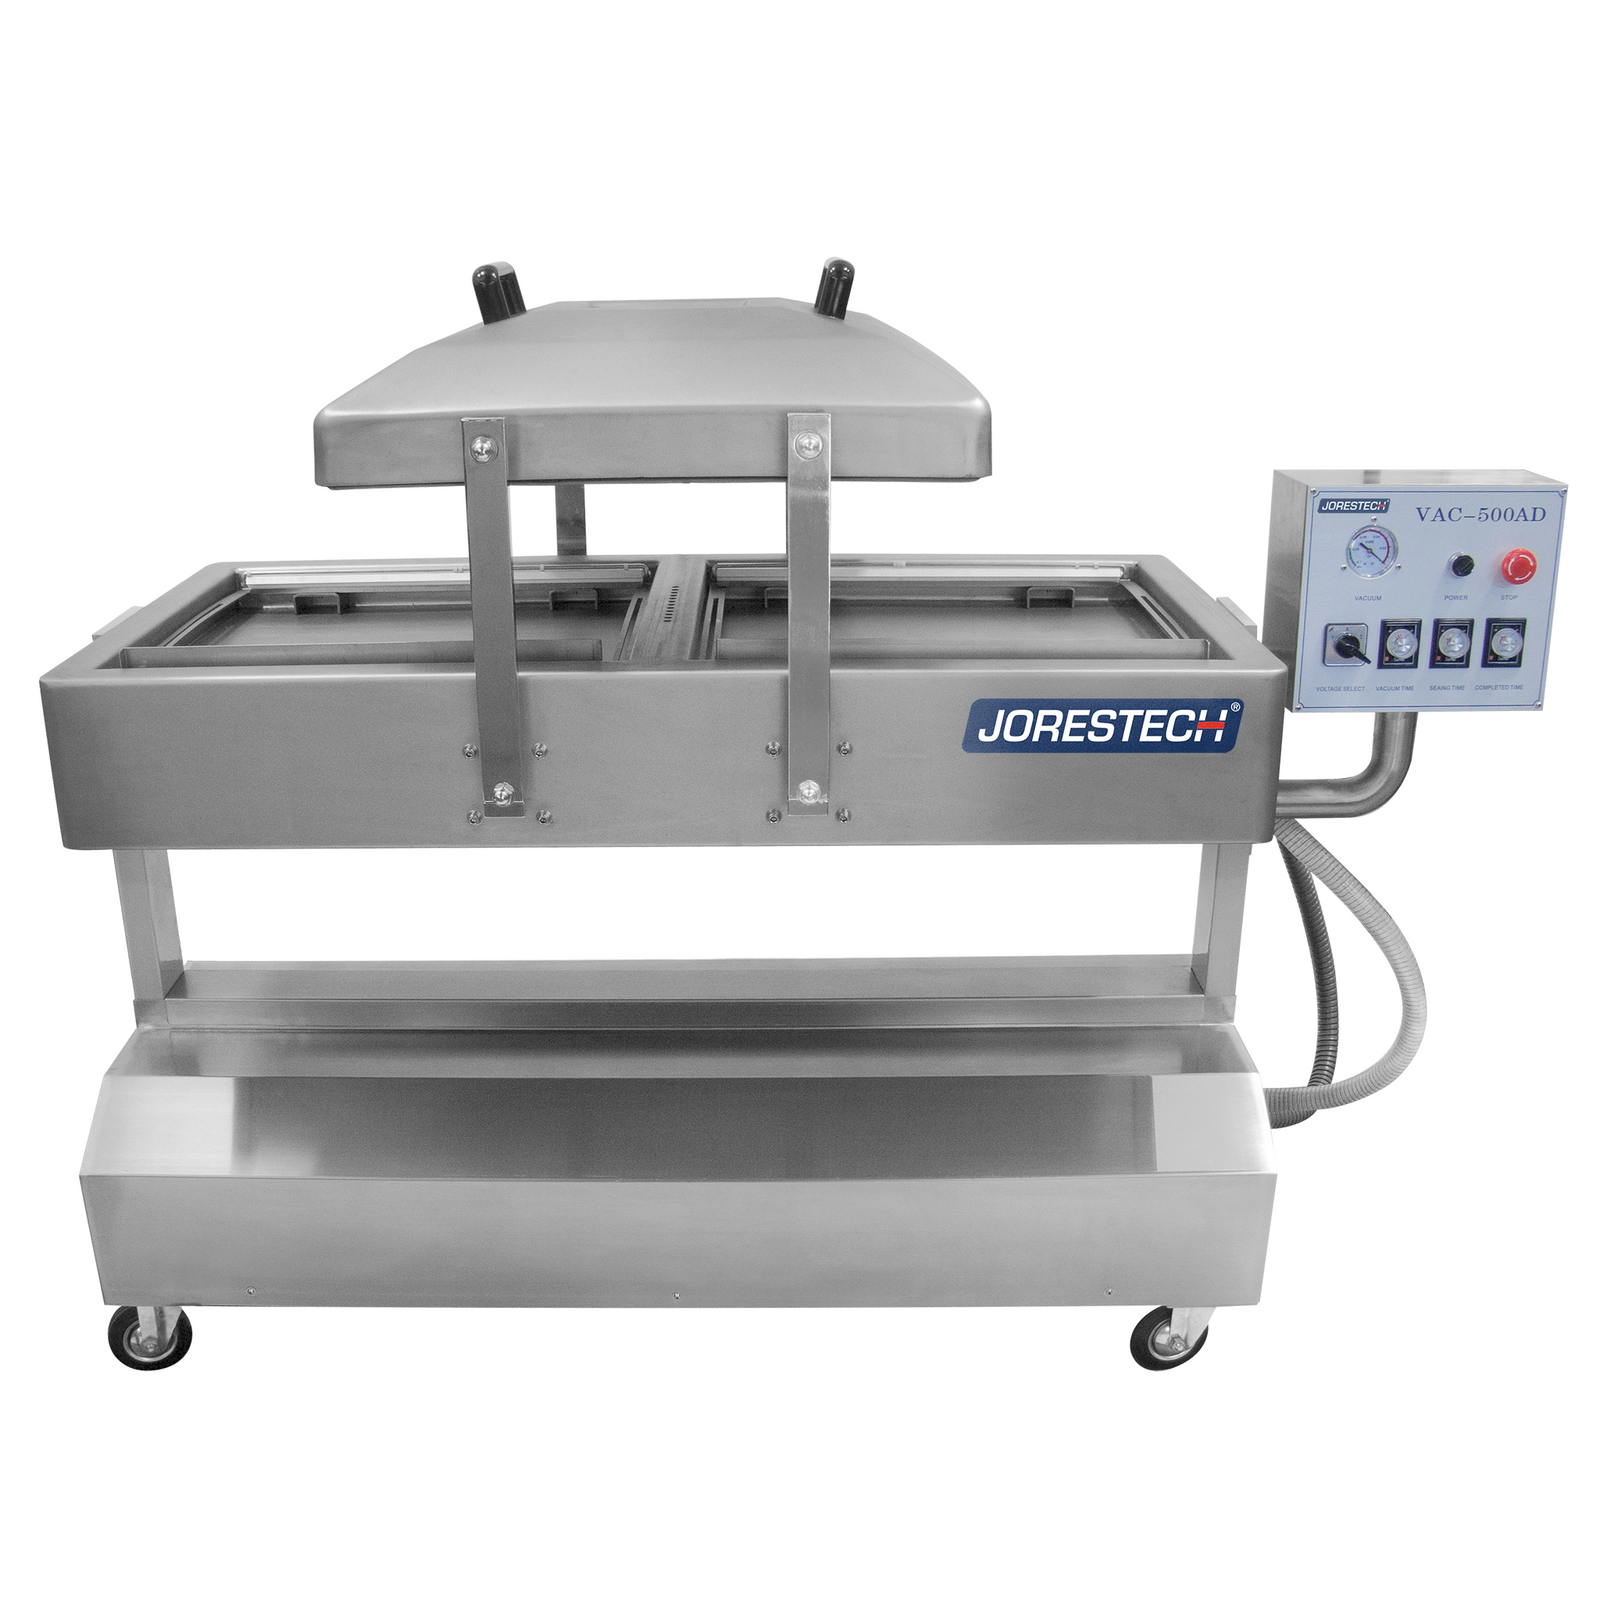 Stainless steel reclinable commercial doble chamber vacuum sealer with 20 inches seal bar. The lid of the vacuum sealer is open so both chambers are visible